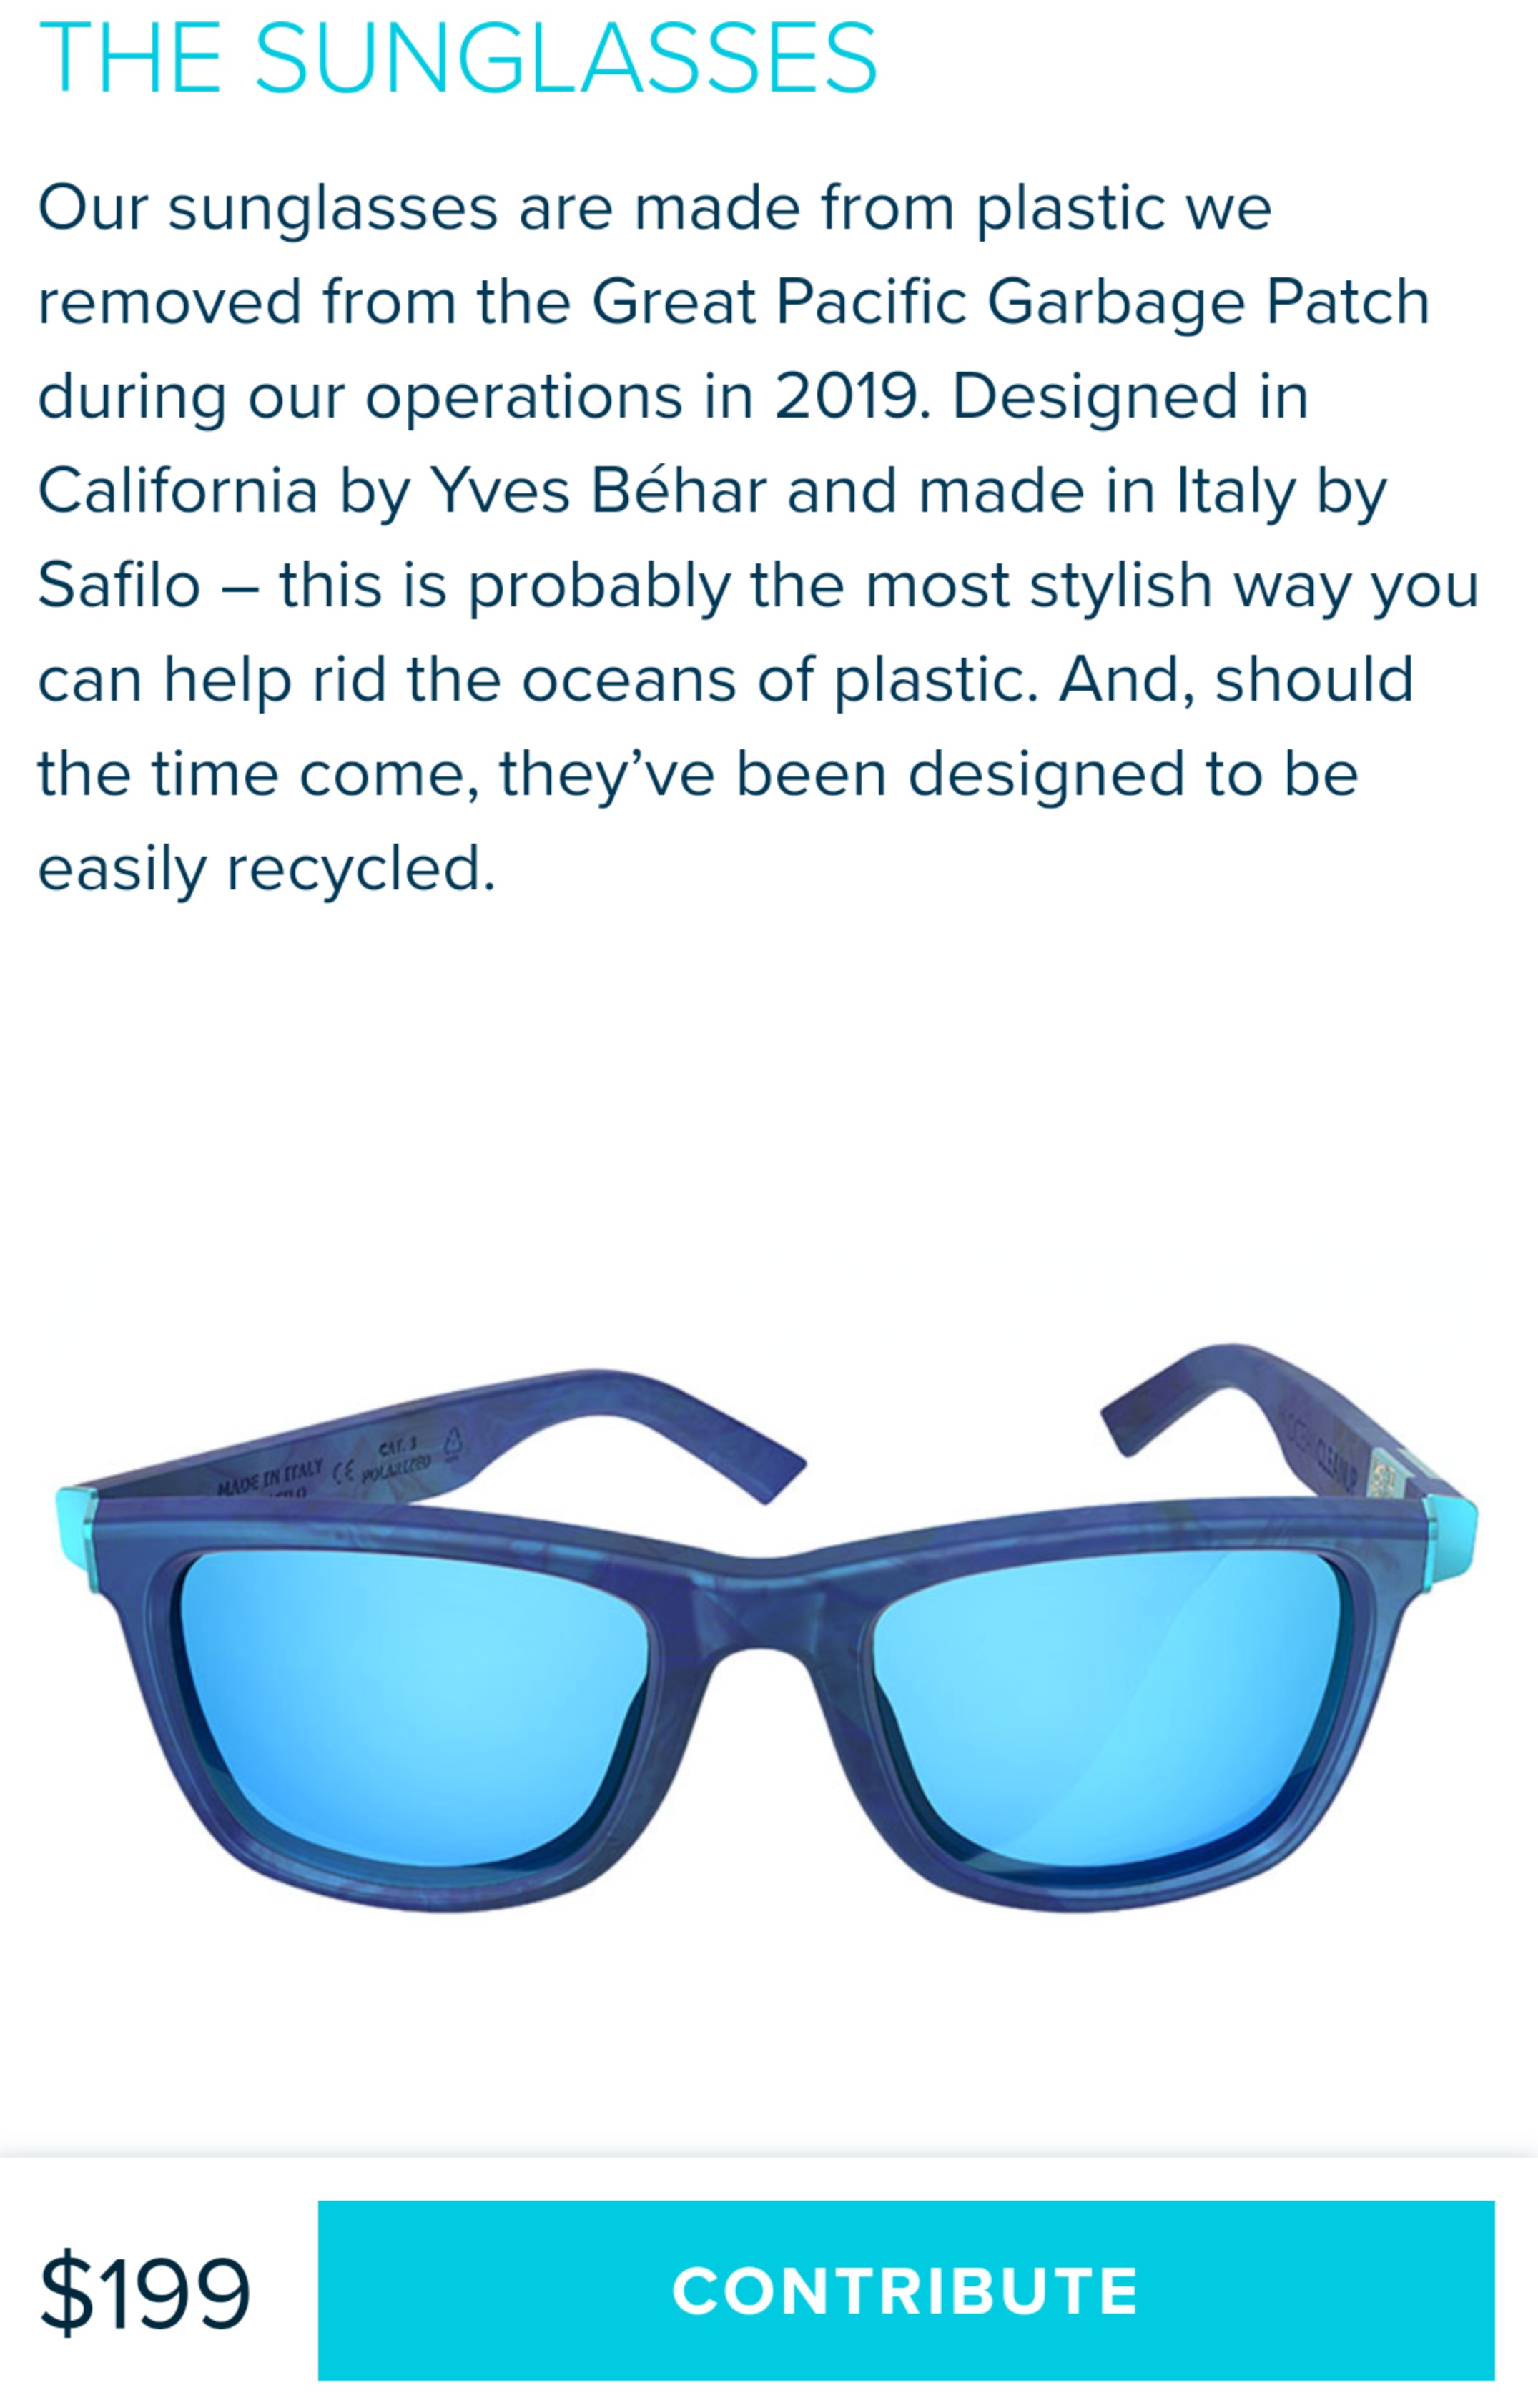 The Ocean Cleanup's first product - sunglasses